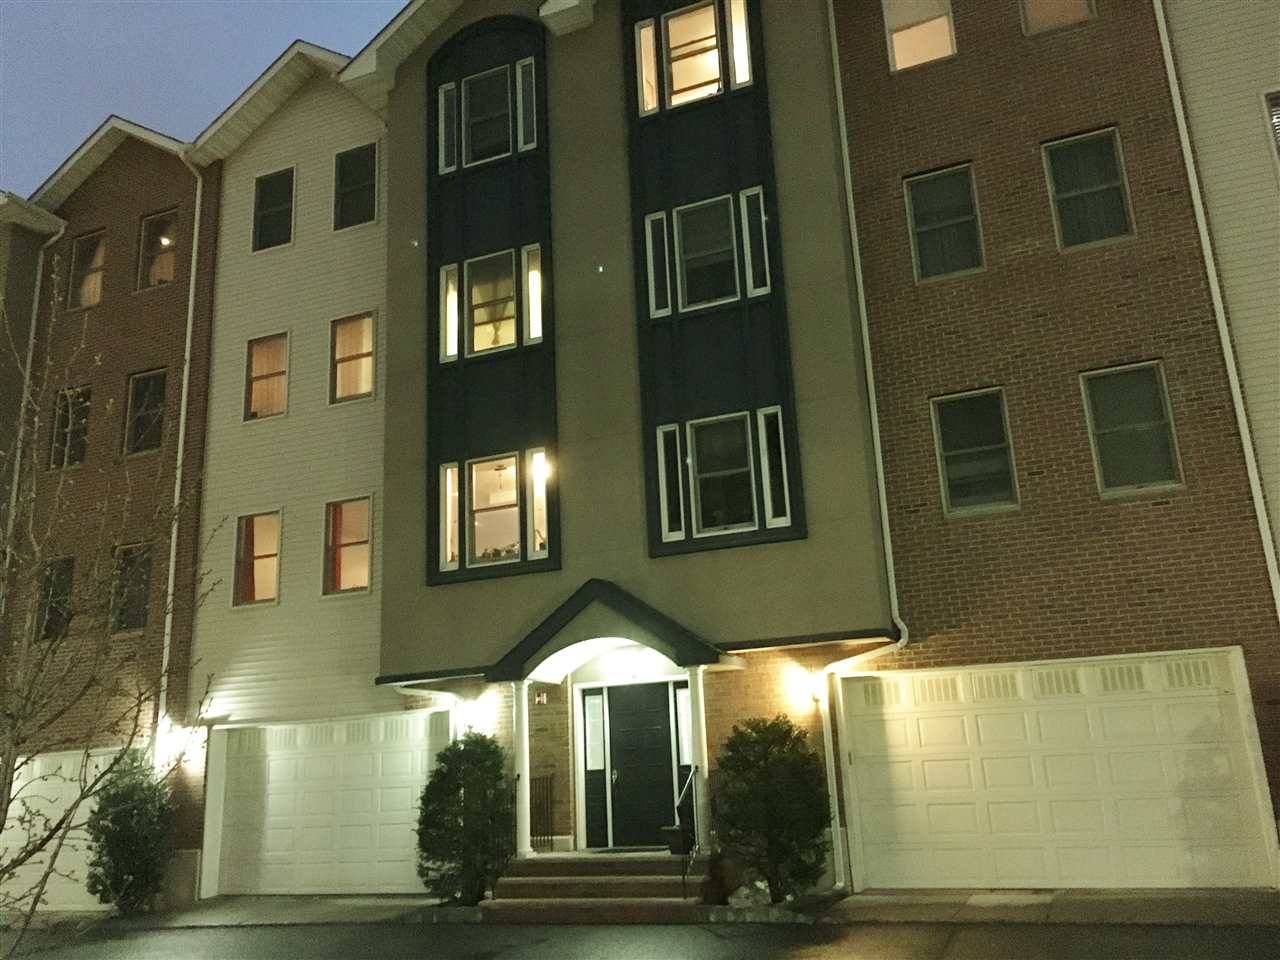 Exquisite apartment for Rent - 2 BR New Jersey